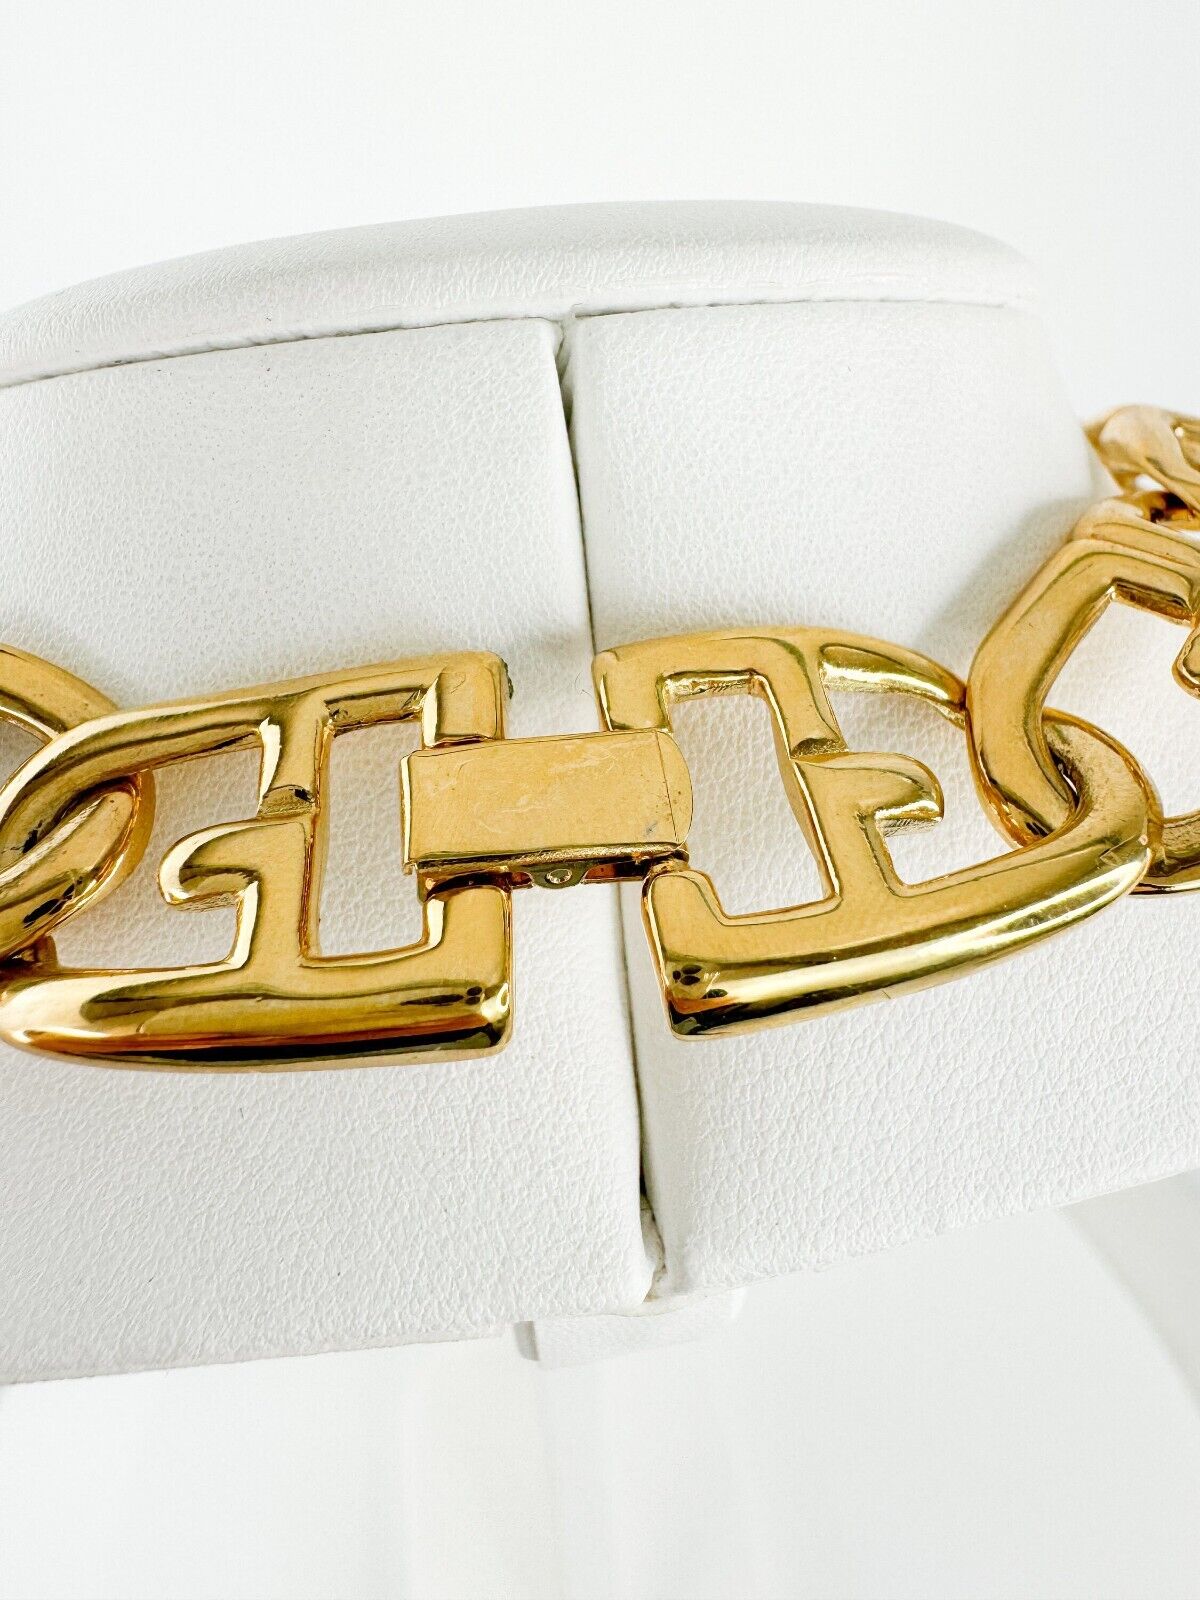 Givenchy Necklace 1980s, Givenchy Necklace G Monogram Logo Link Vintage, Y2K Link Necklace, Gift for Her, Personalized Gifts, Rare Vintage